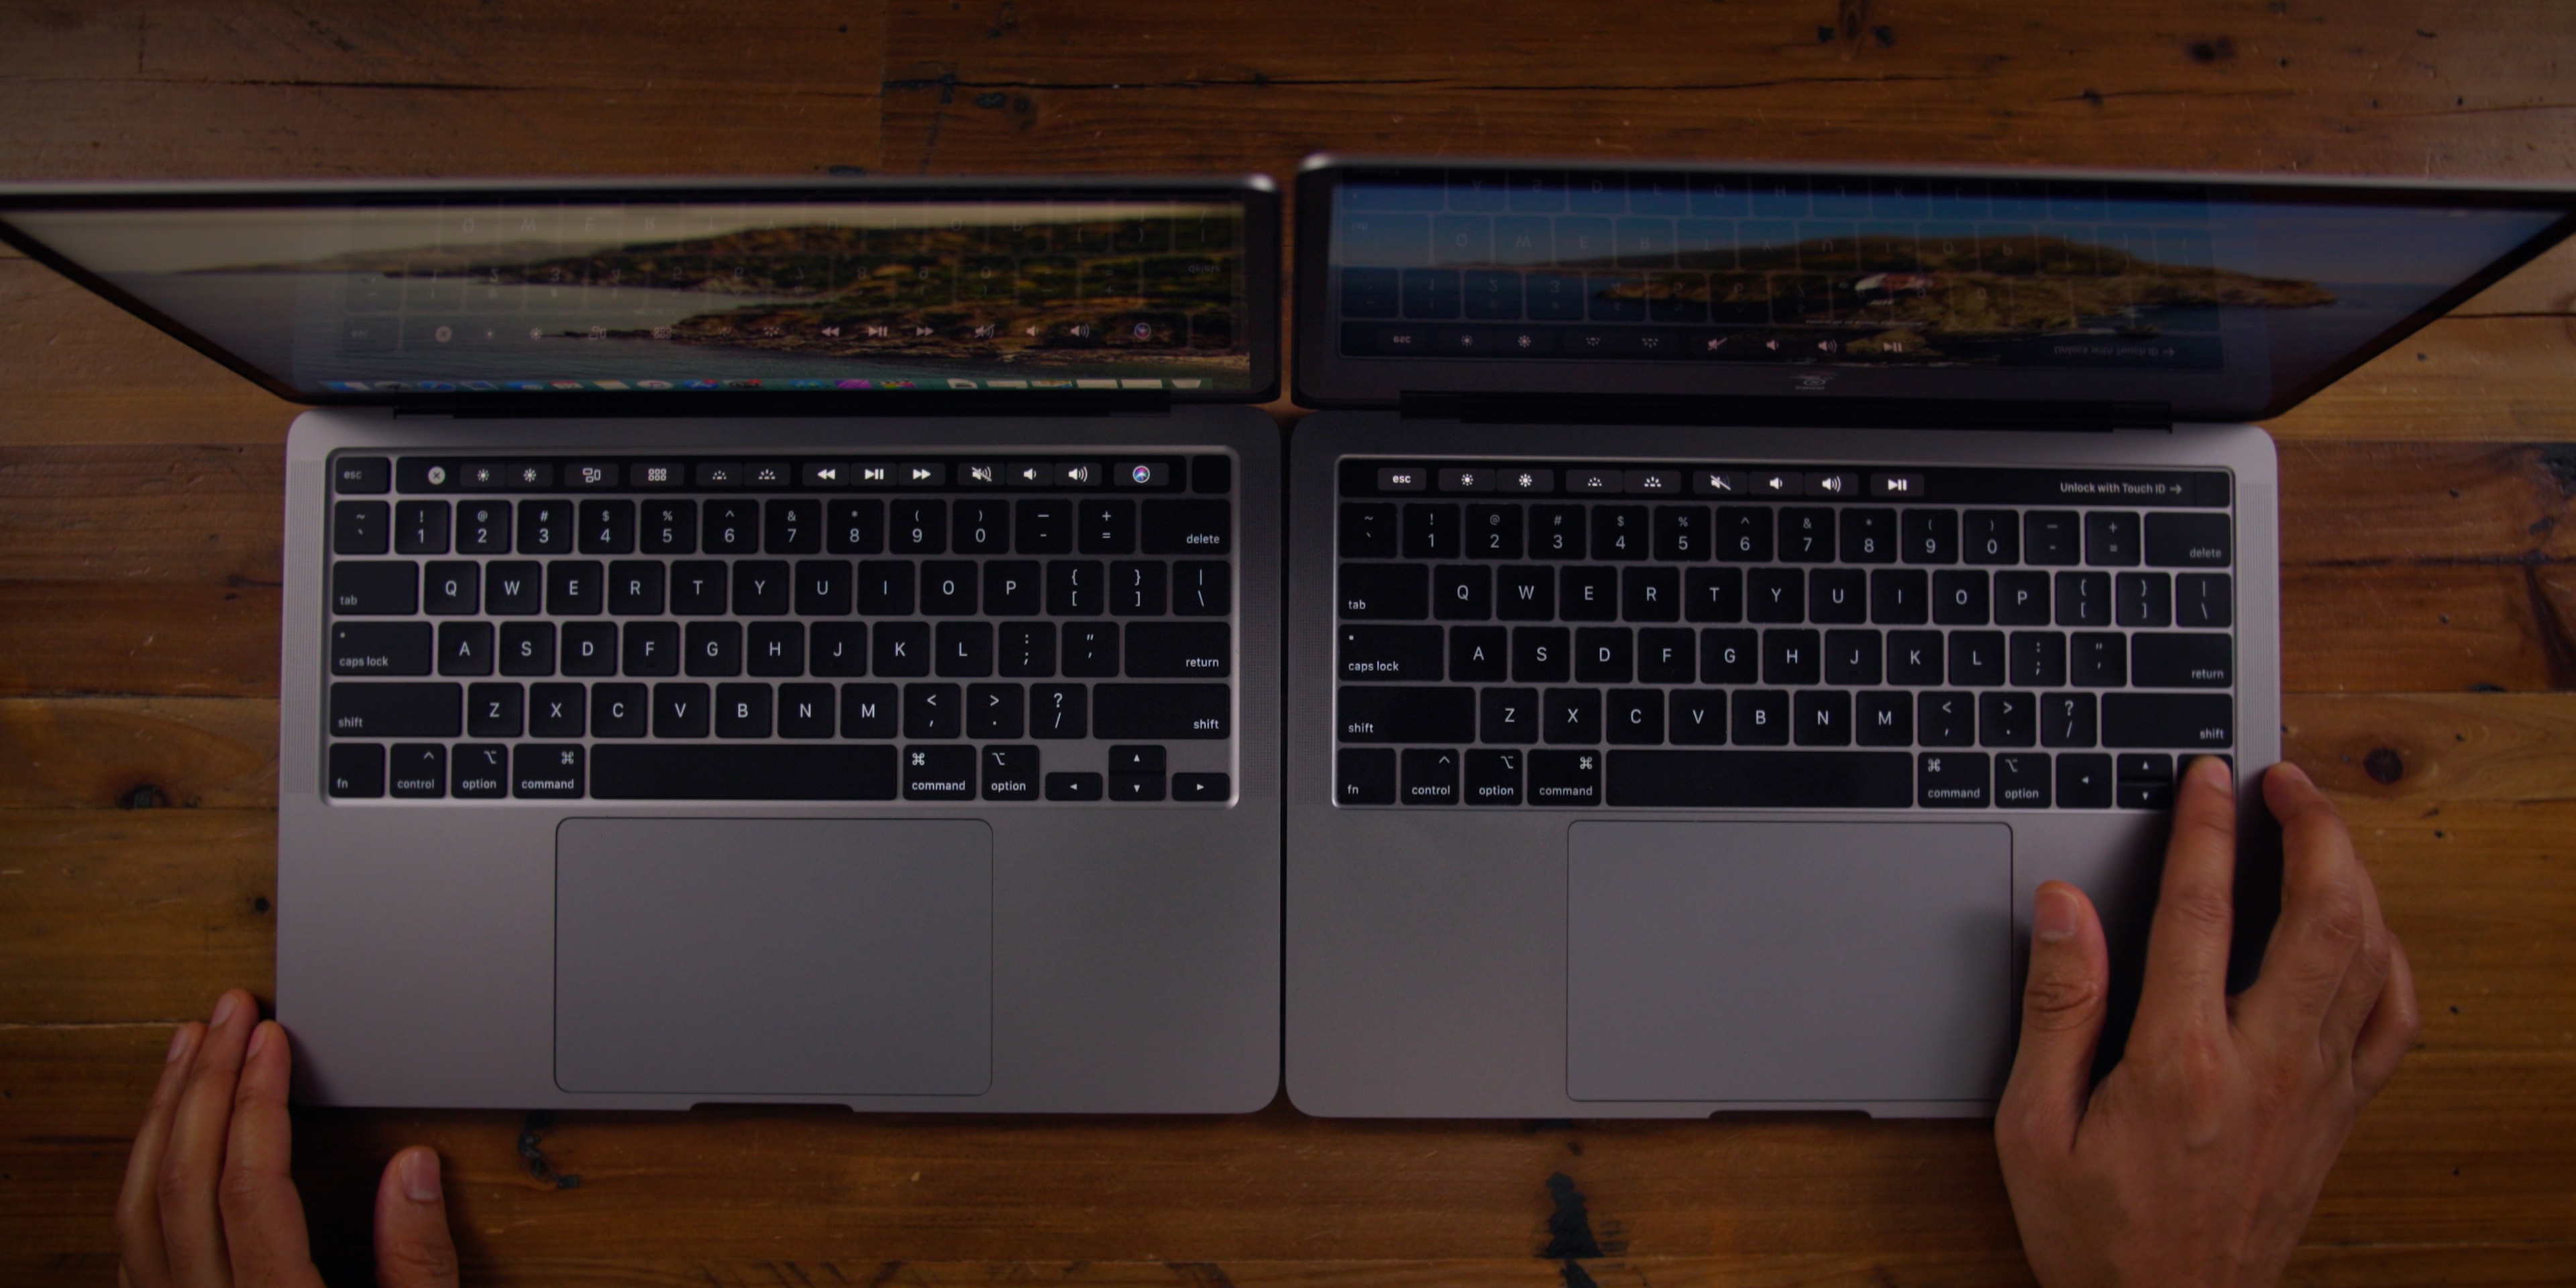 Hands-on: 13-inch MacBook Pro (2020) - a long time coming [Video